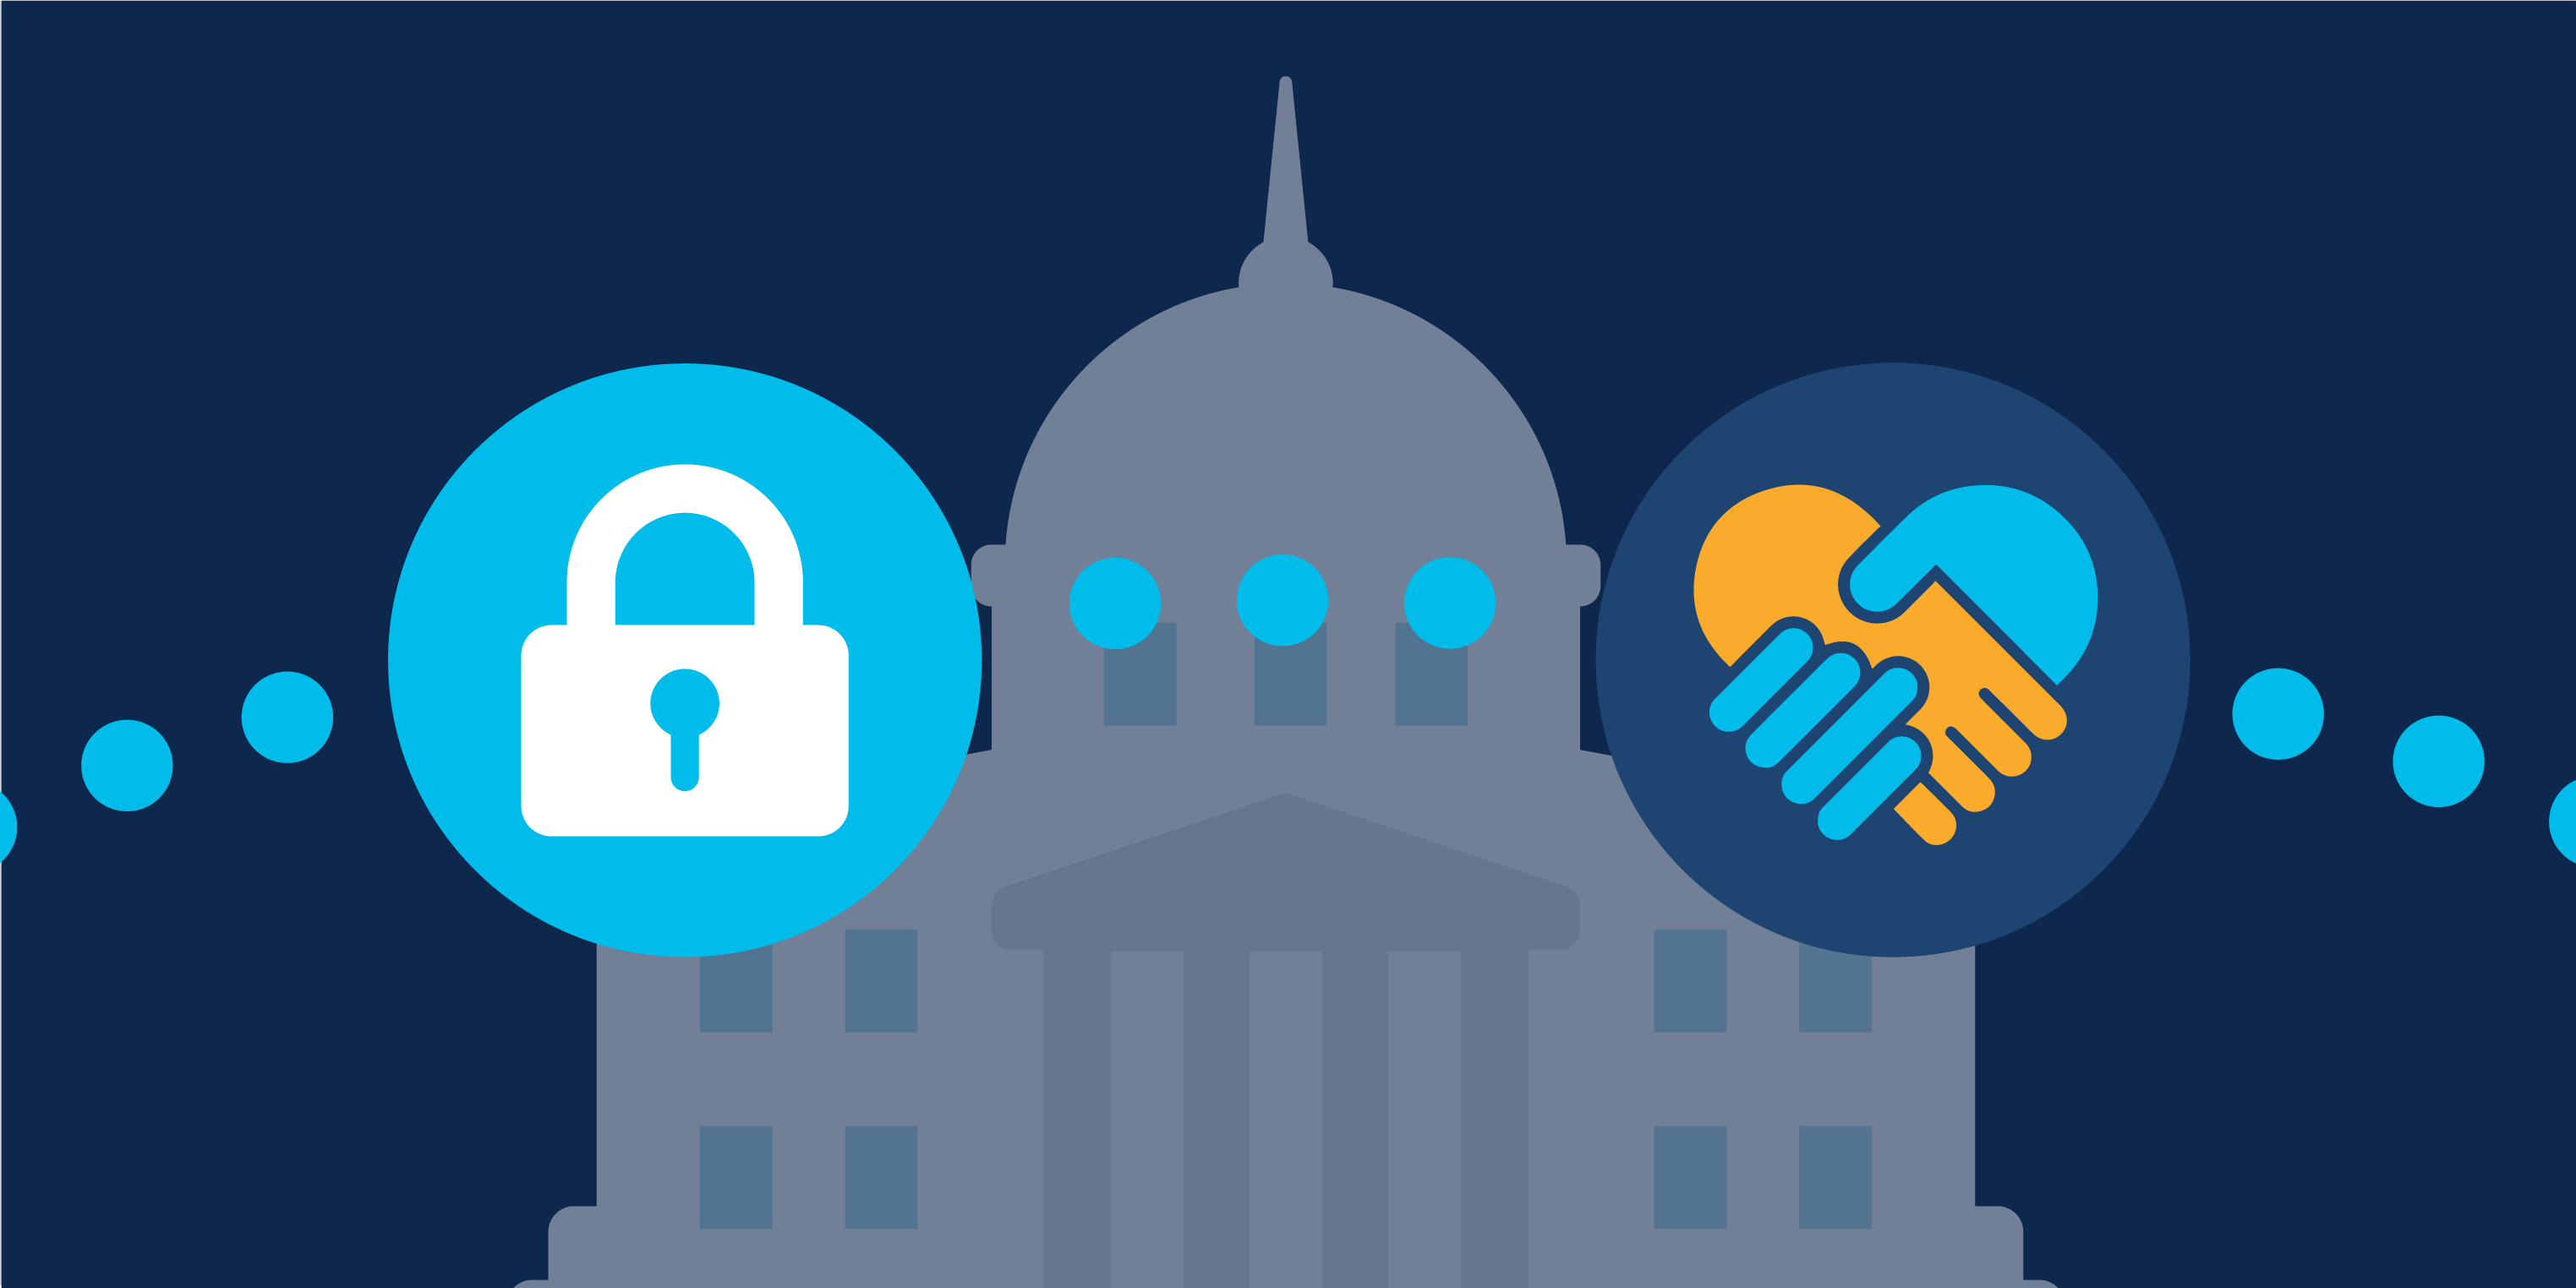 Building Security and Trust in Government